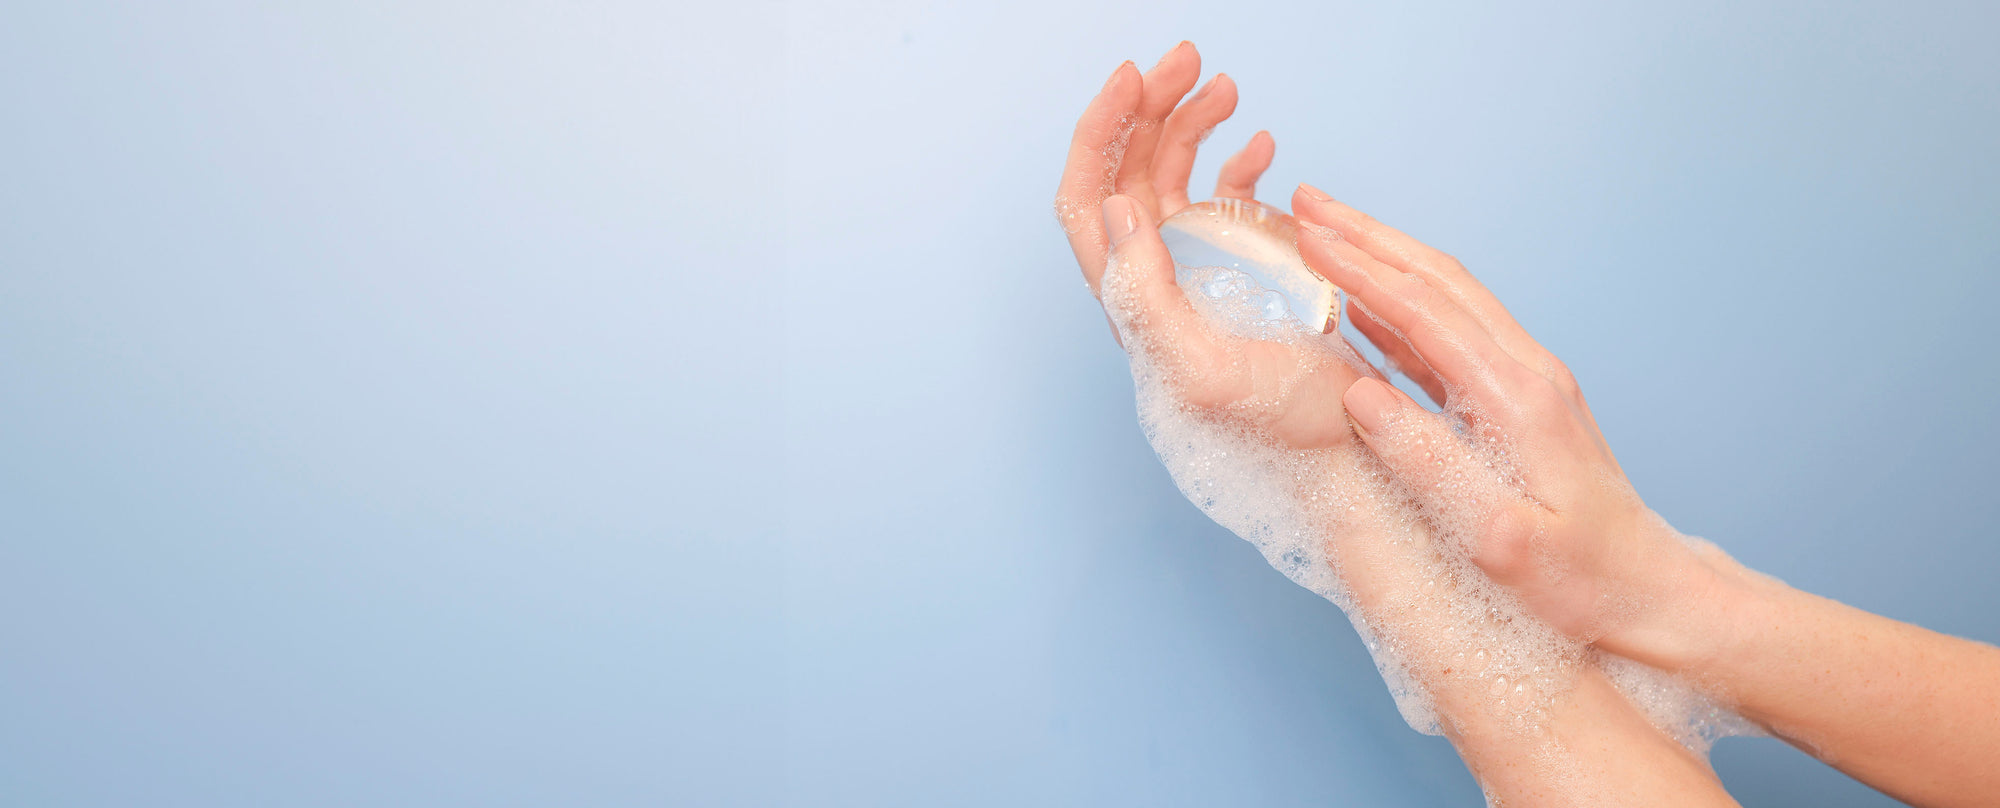 Woman’s hands lathering up Crystal Clear Head-To-Toe Cleansing Soap pictured on a blue background.